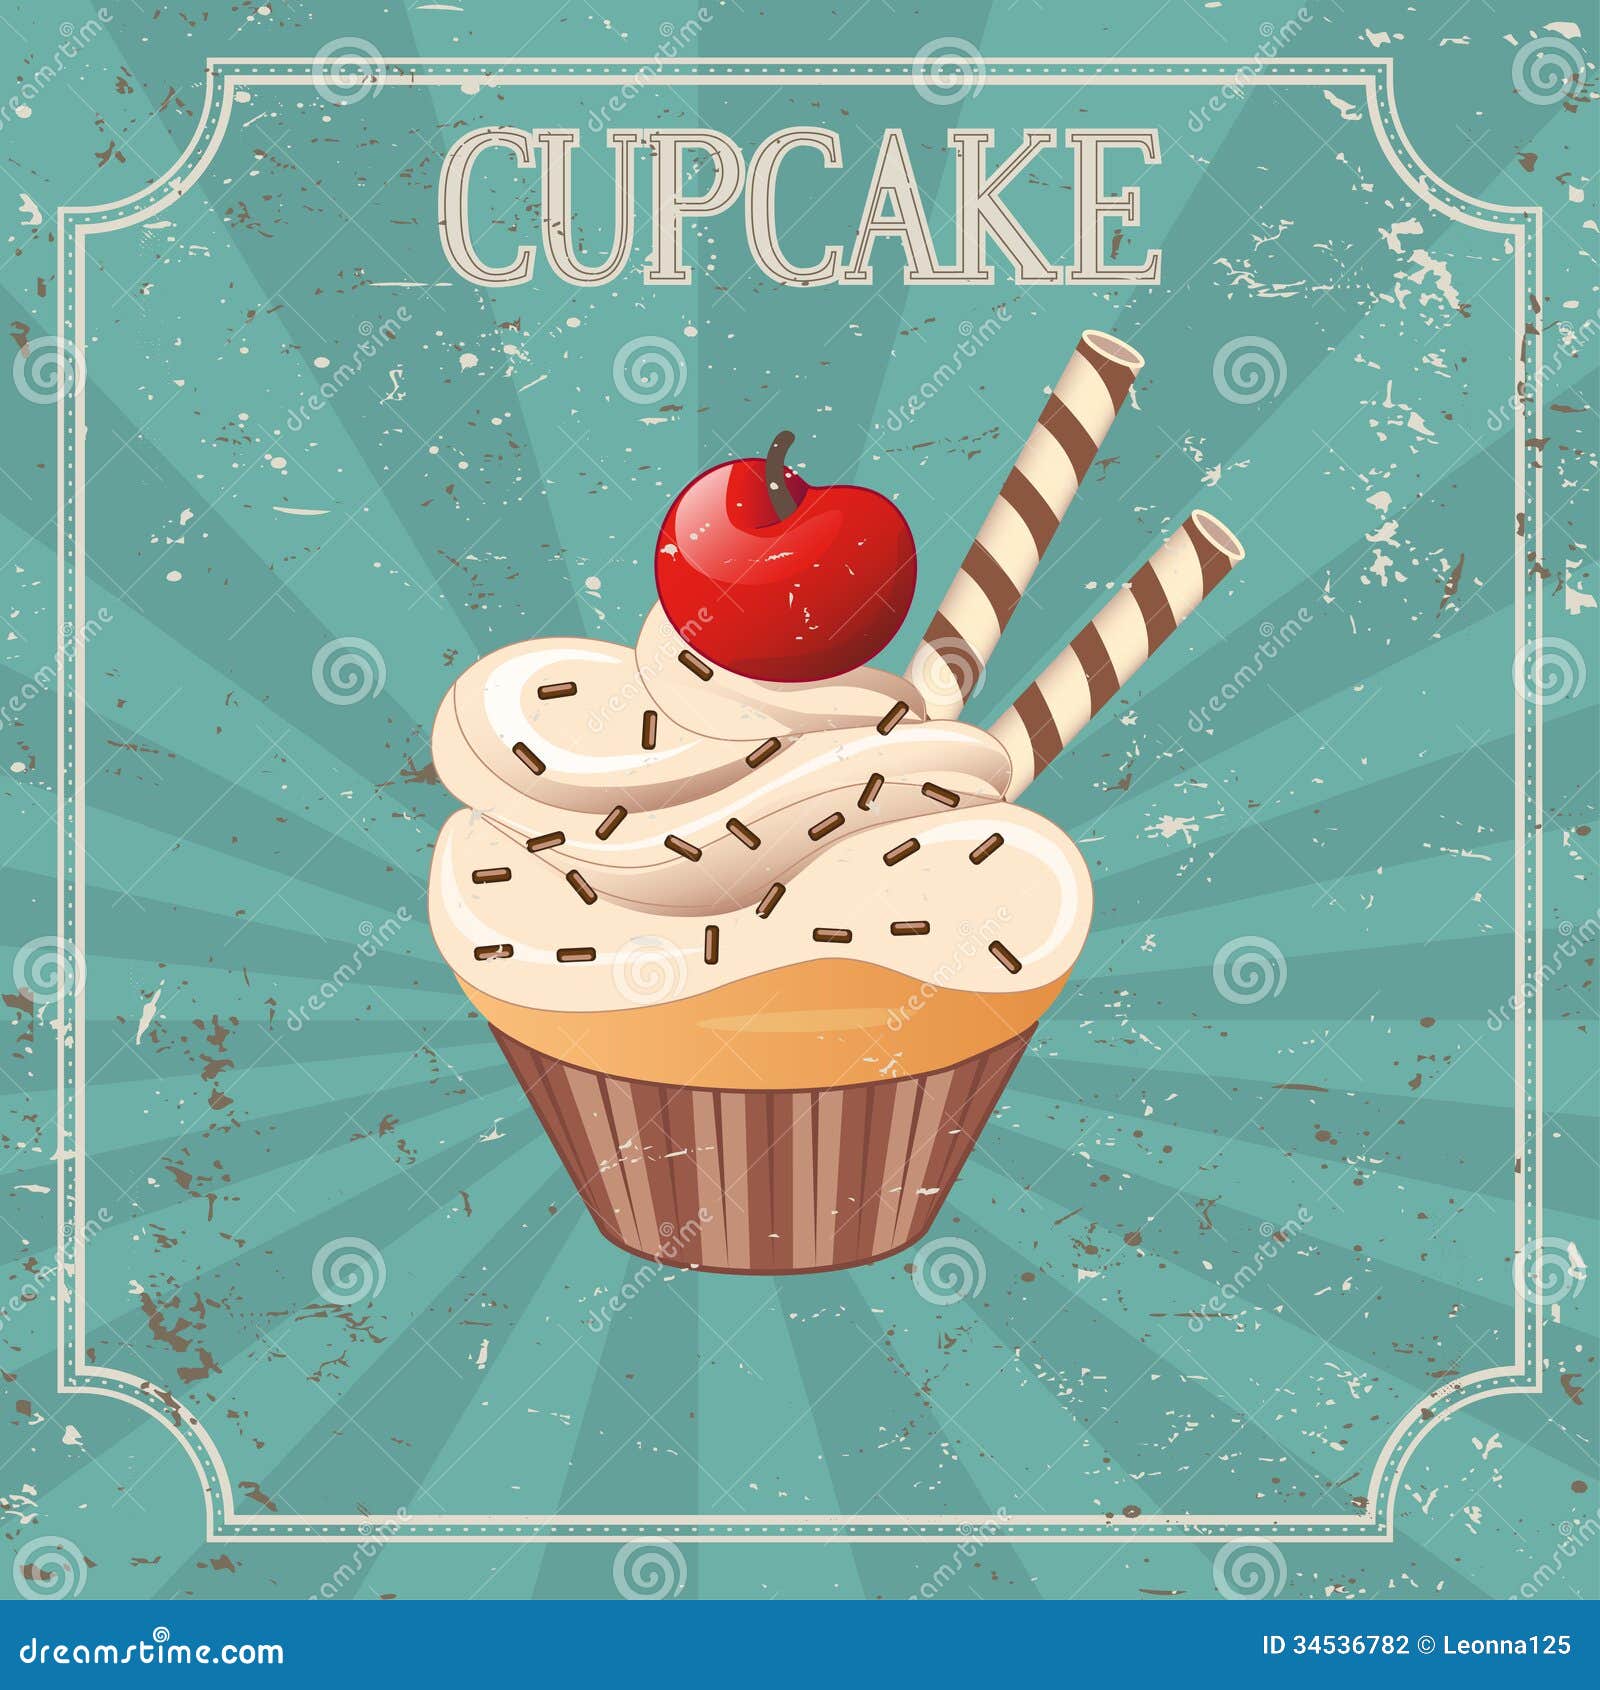 Illustration On vintage Photography cupcakes Background photography Stock Cupcake   Vintage   Image